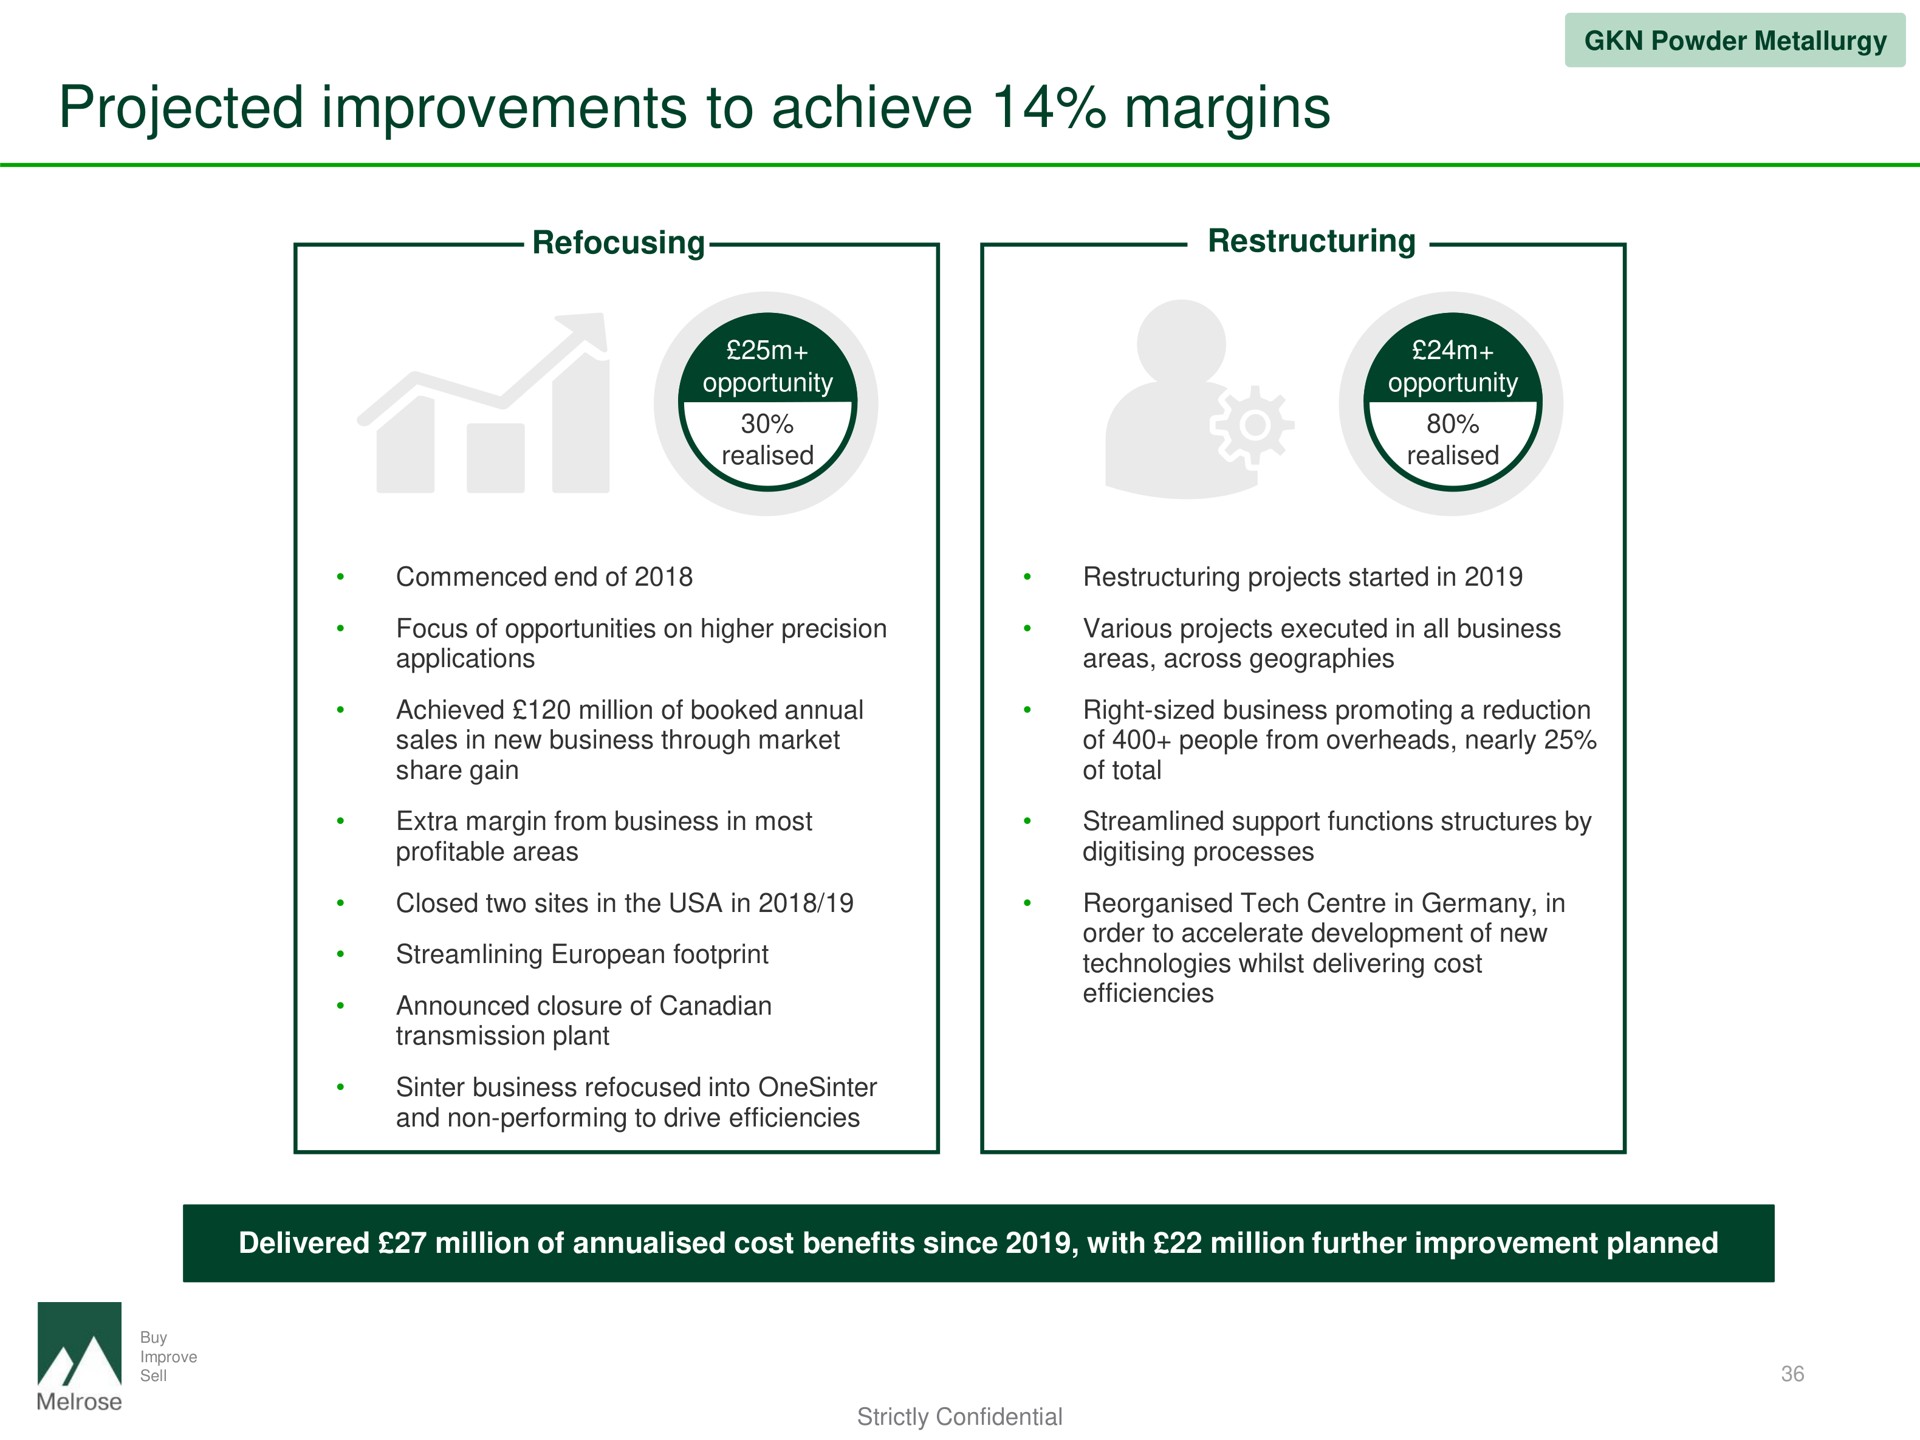 projected improvements to achieve margins | Melrose